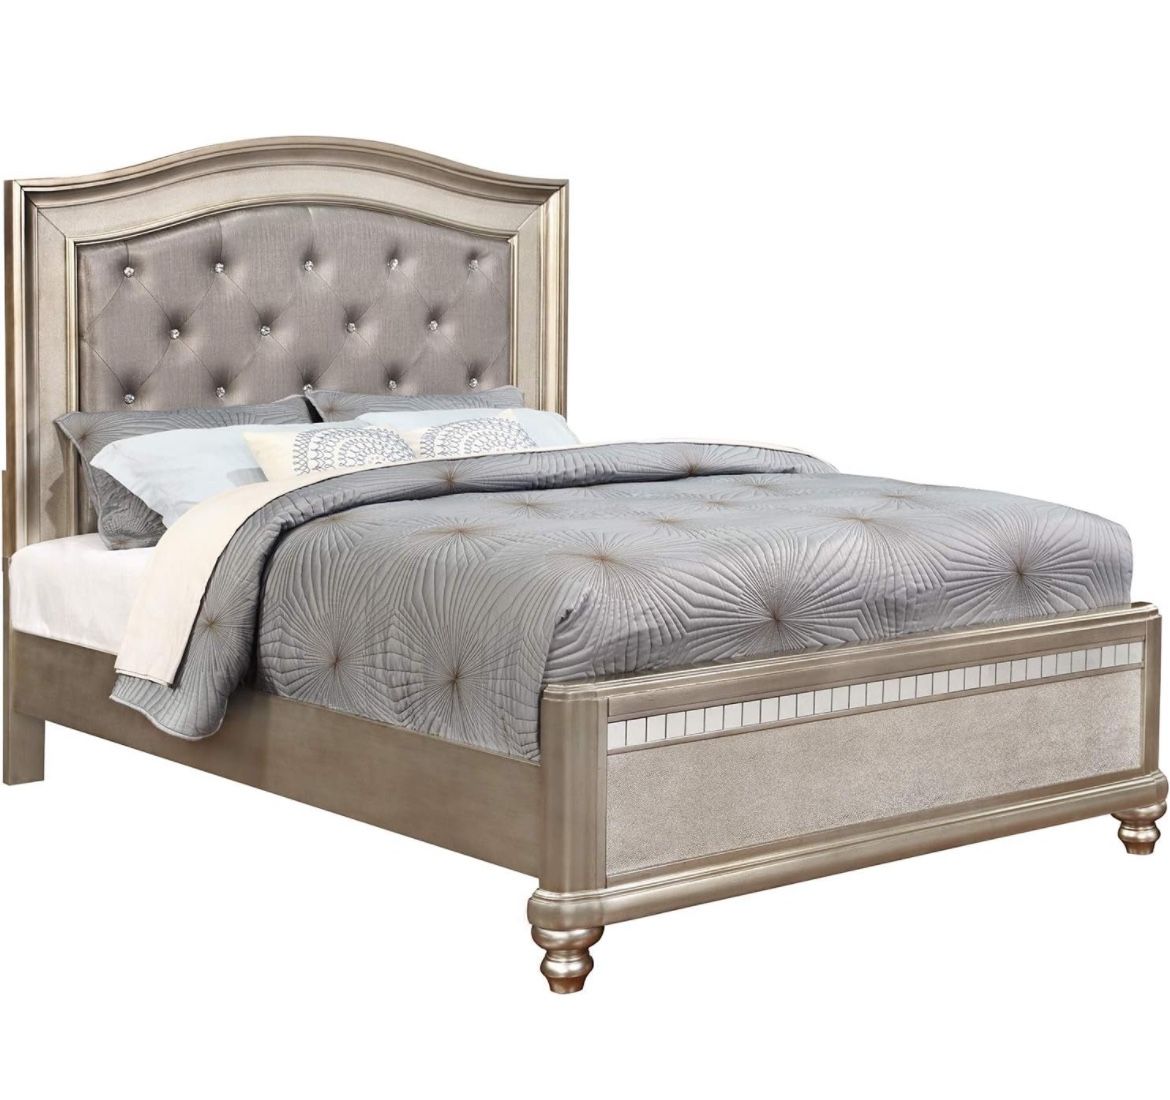 Girly Queen Size Bed (read Description)